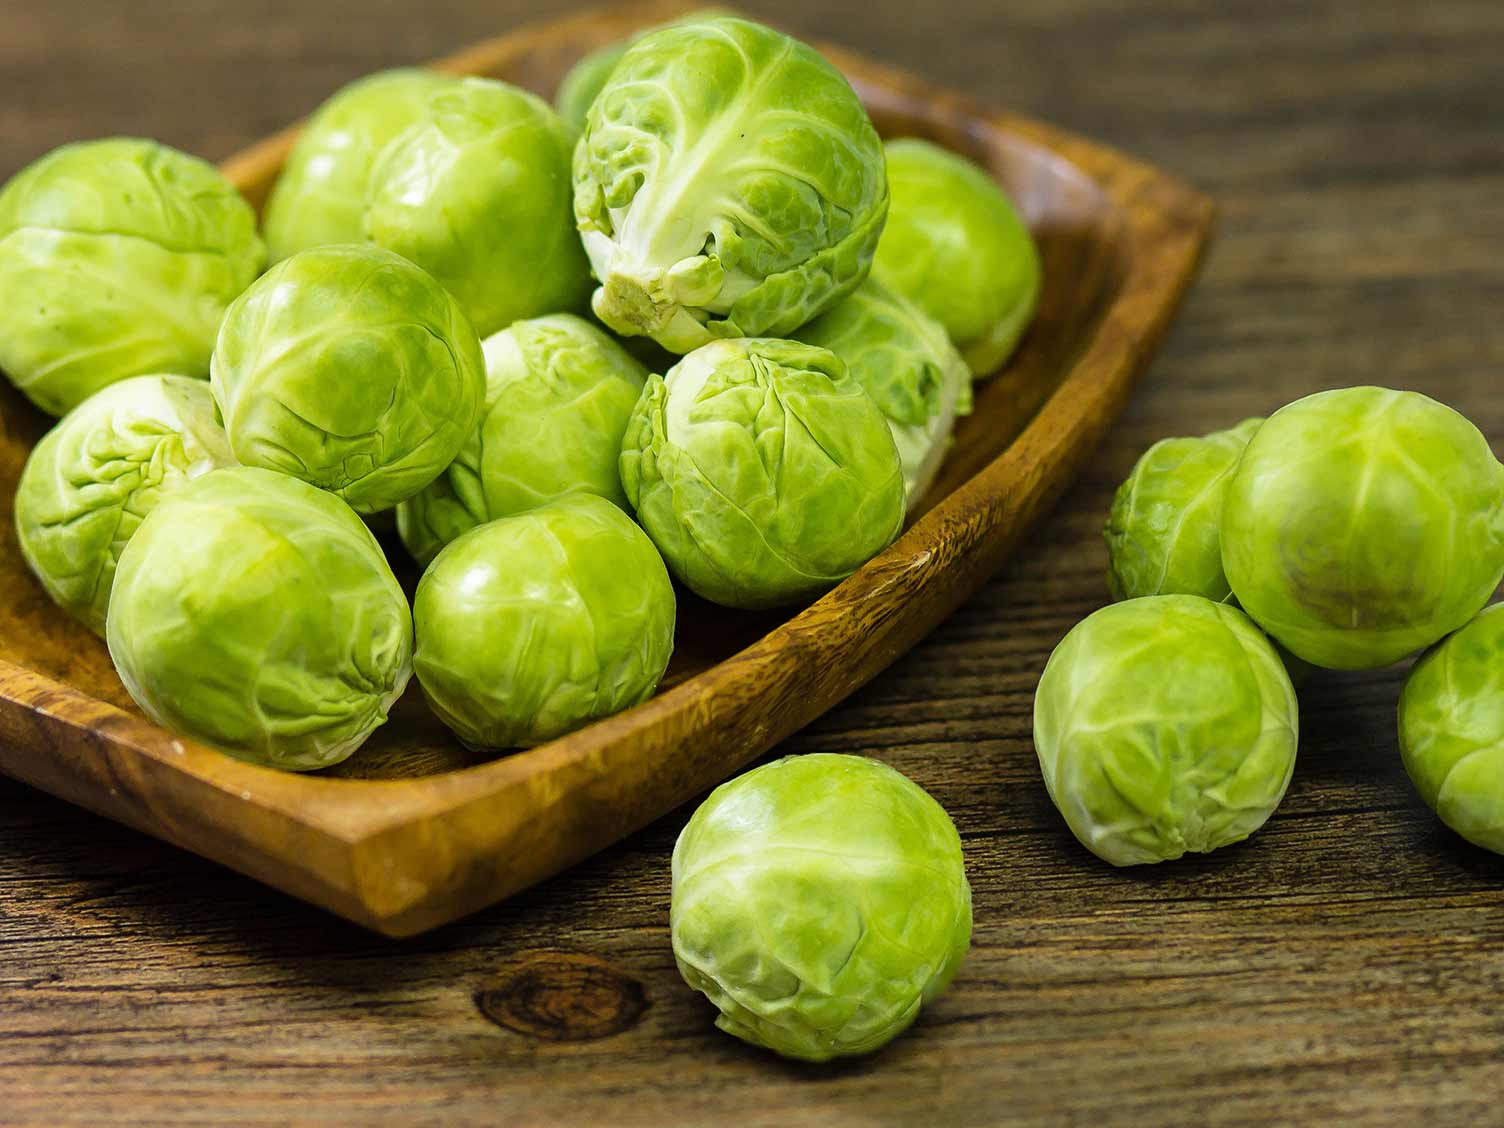 divisive foods - Brussel sprouts